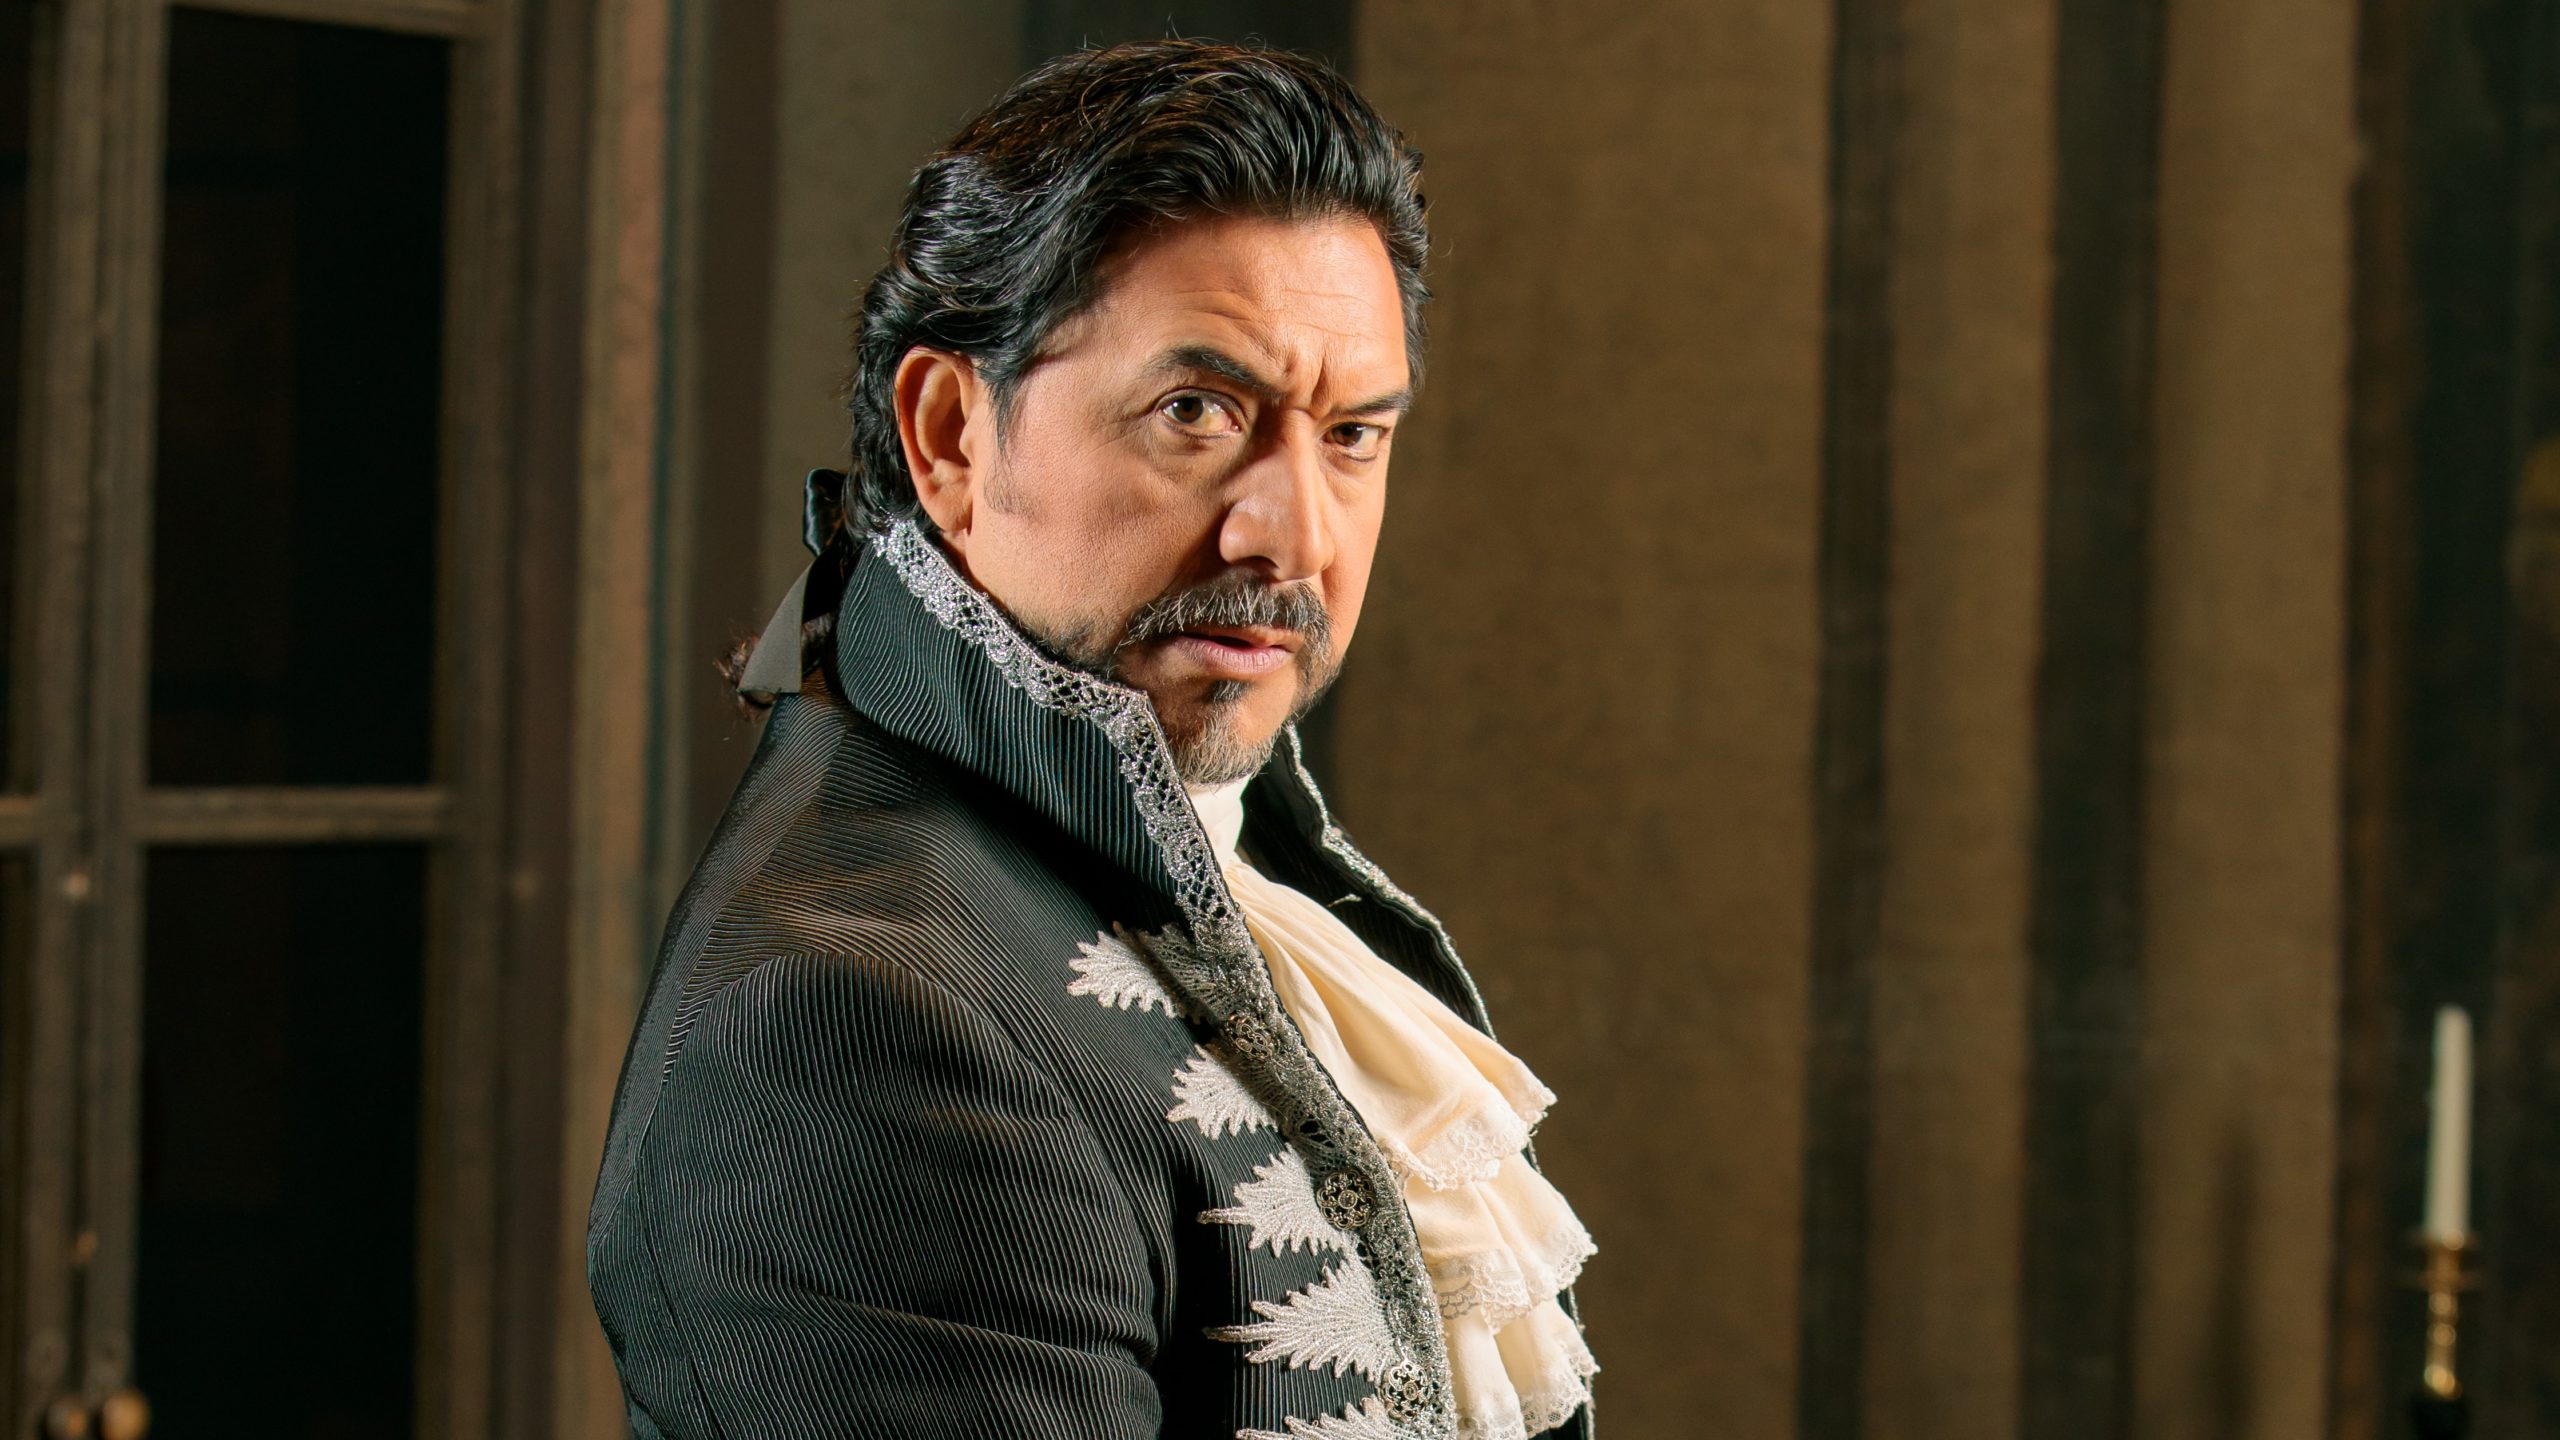 Luis Lesdesma in costume as Baron Scarpia in Tosca smolders at the camera. He is wearing an ornate black top coat and his shiny black hair is pulled back with a black ribbon.